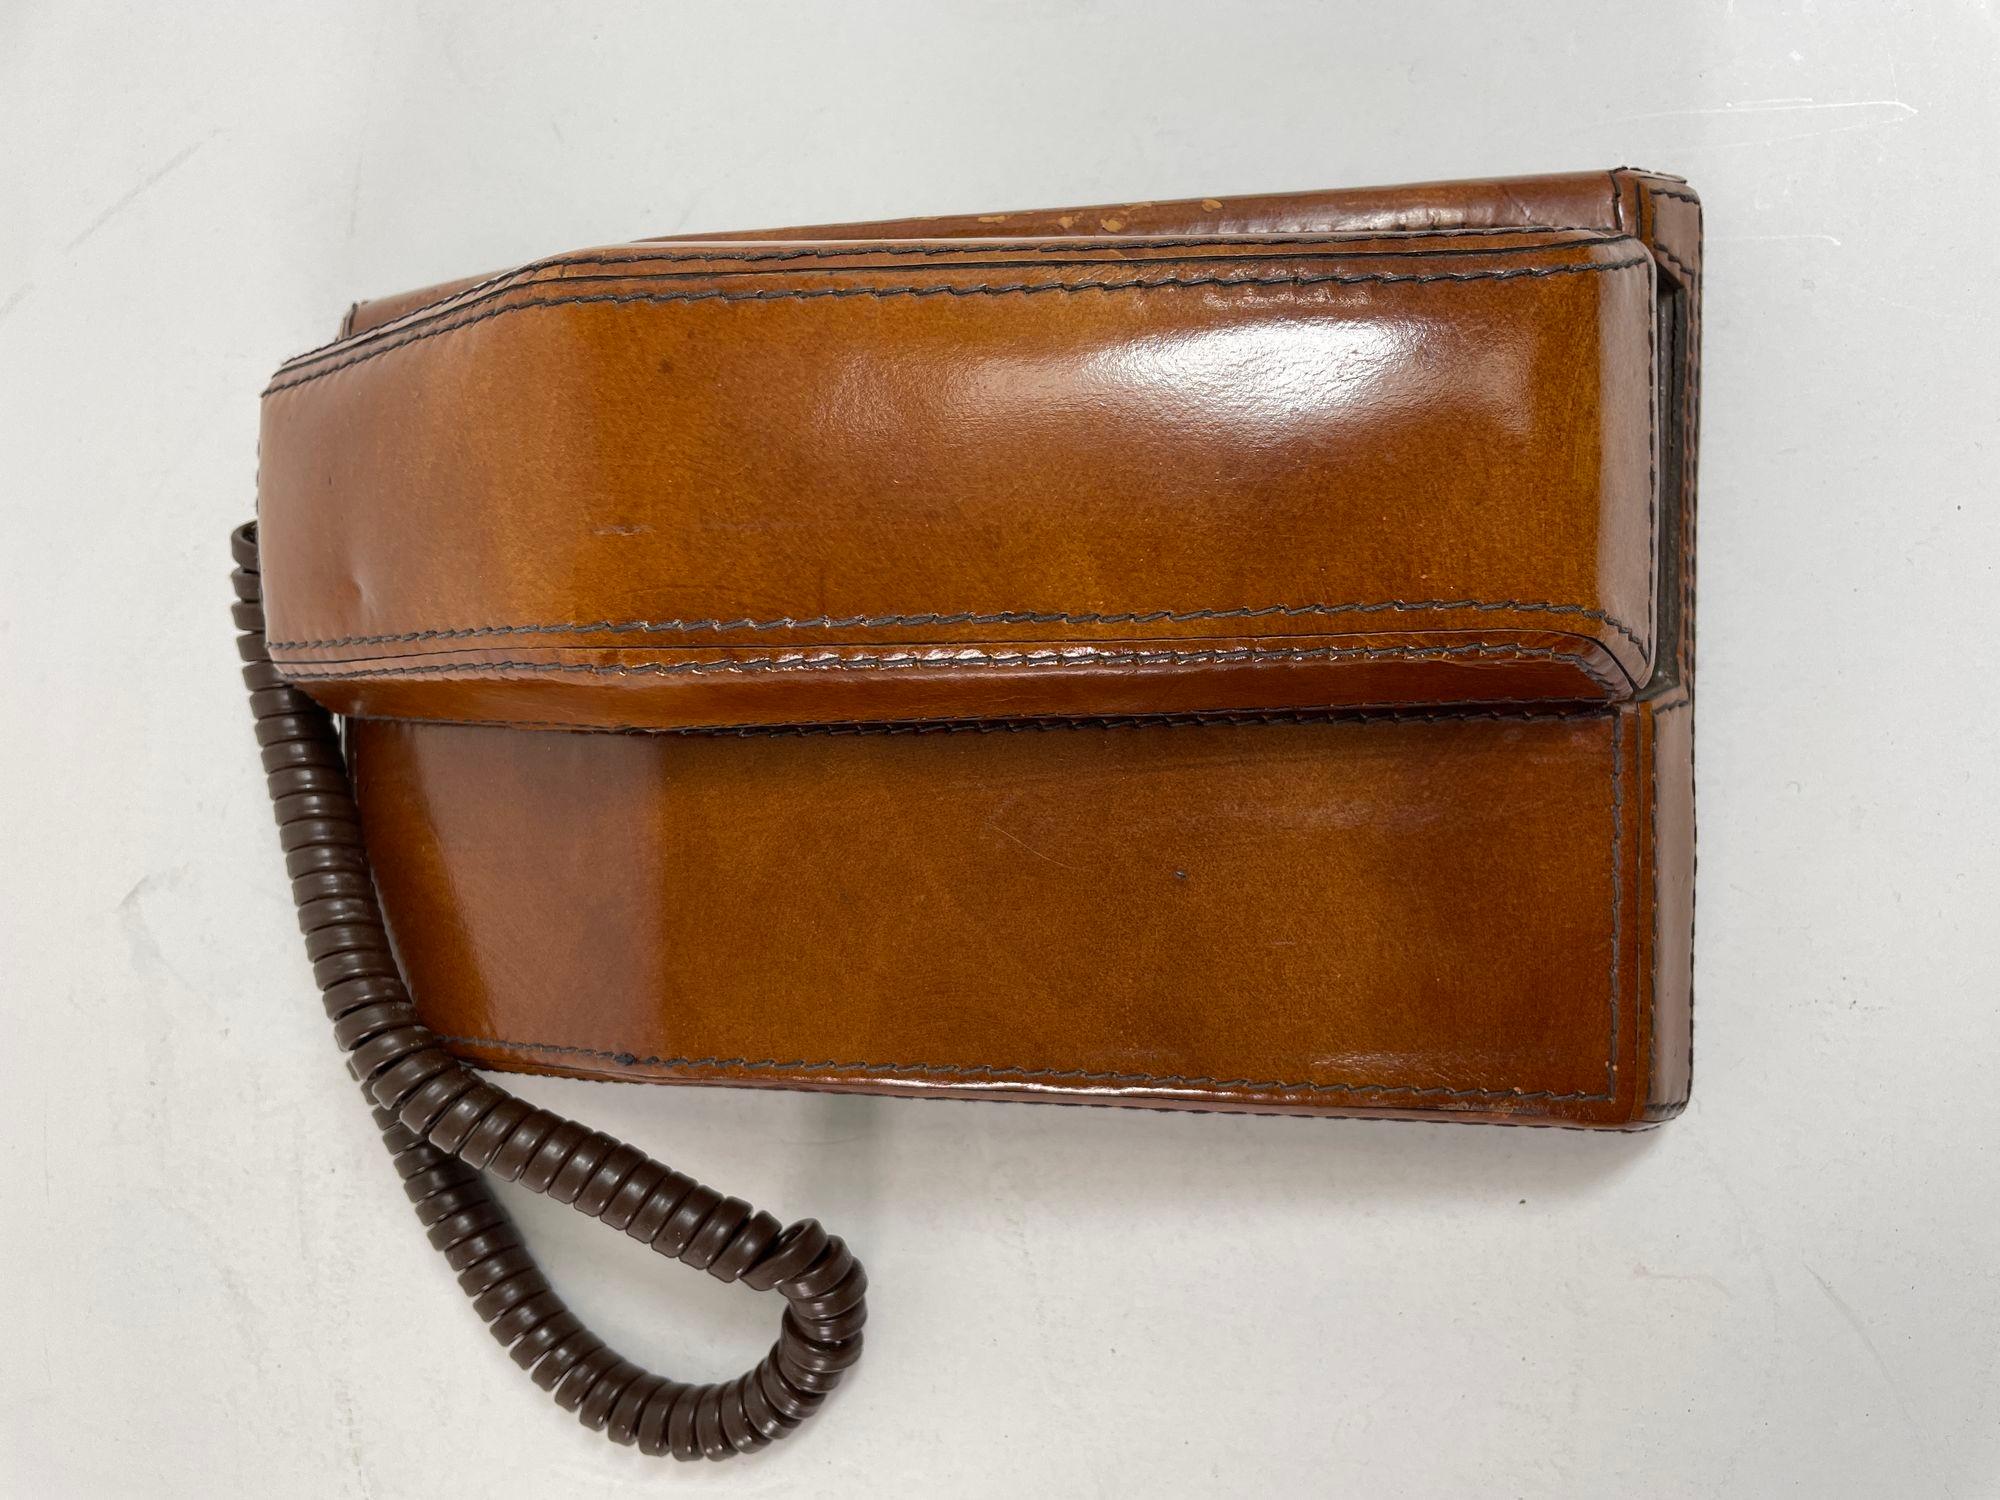 Vintage Brown Leather Covered and Hand-Stitched Telephone by Contempra, 1970s For Sale 1